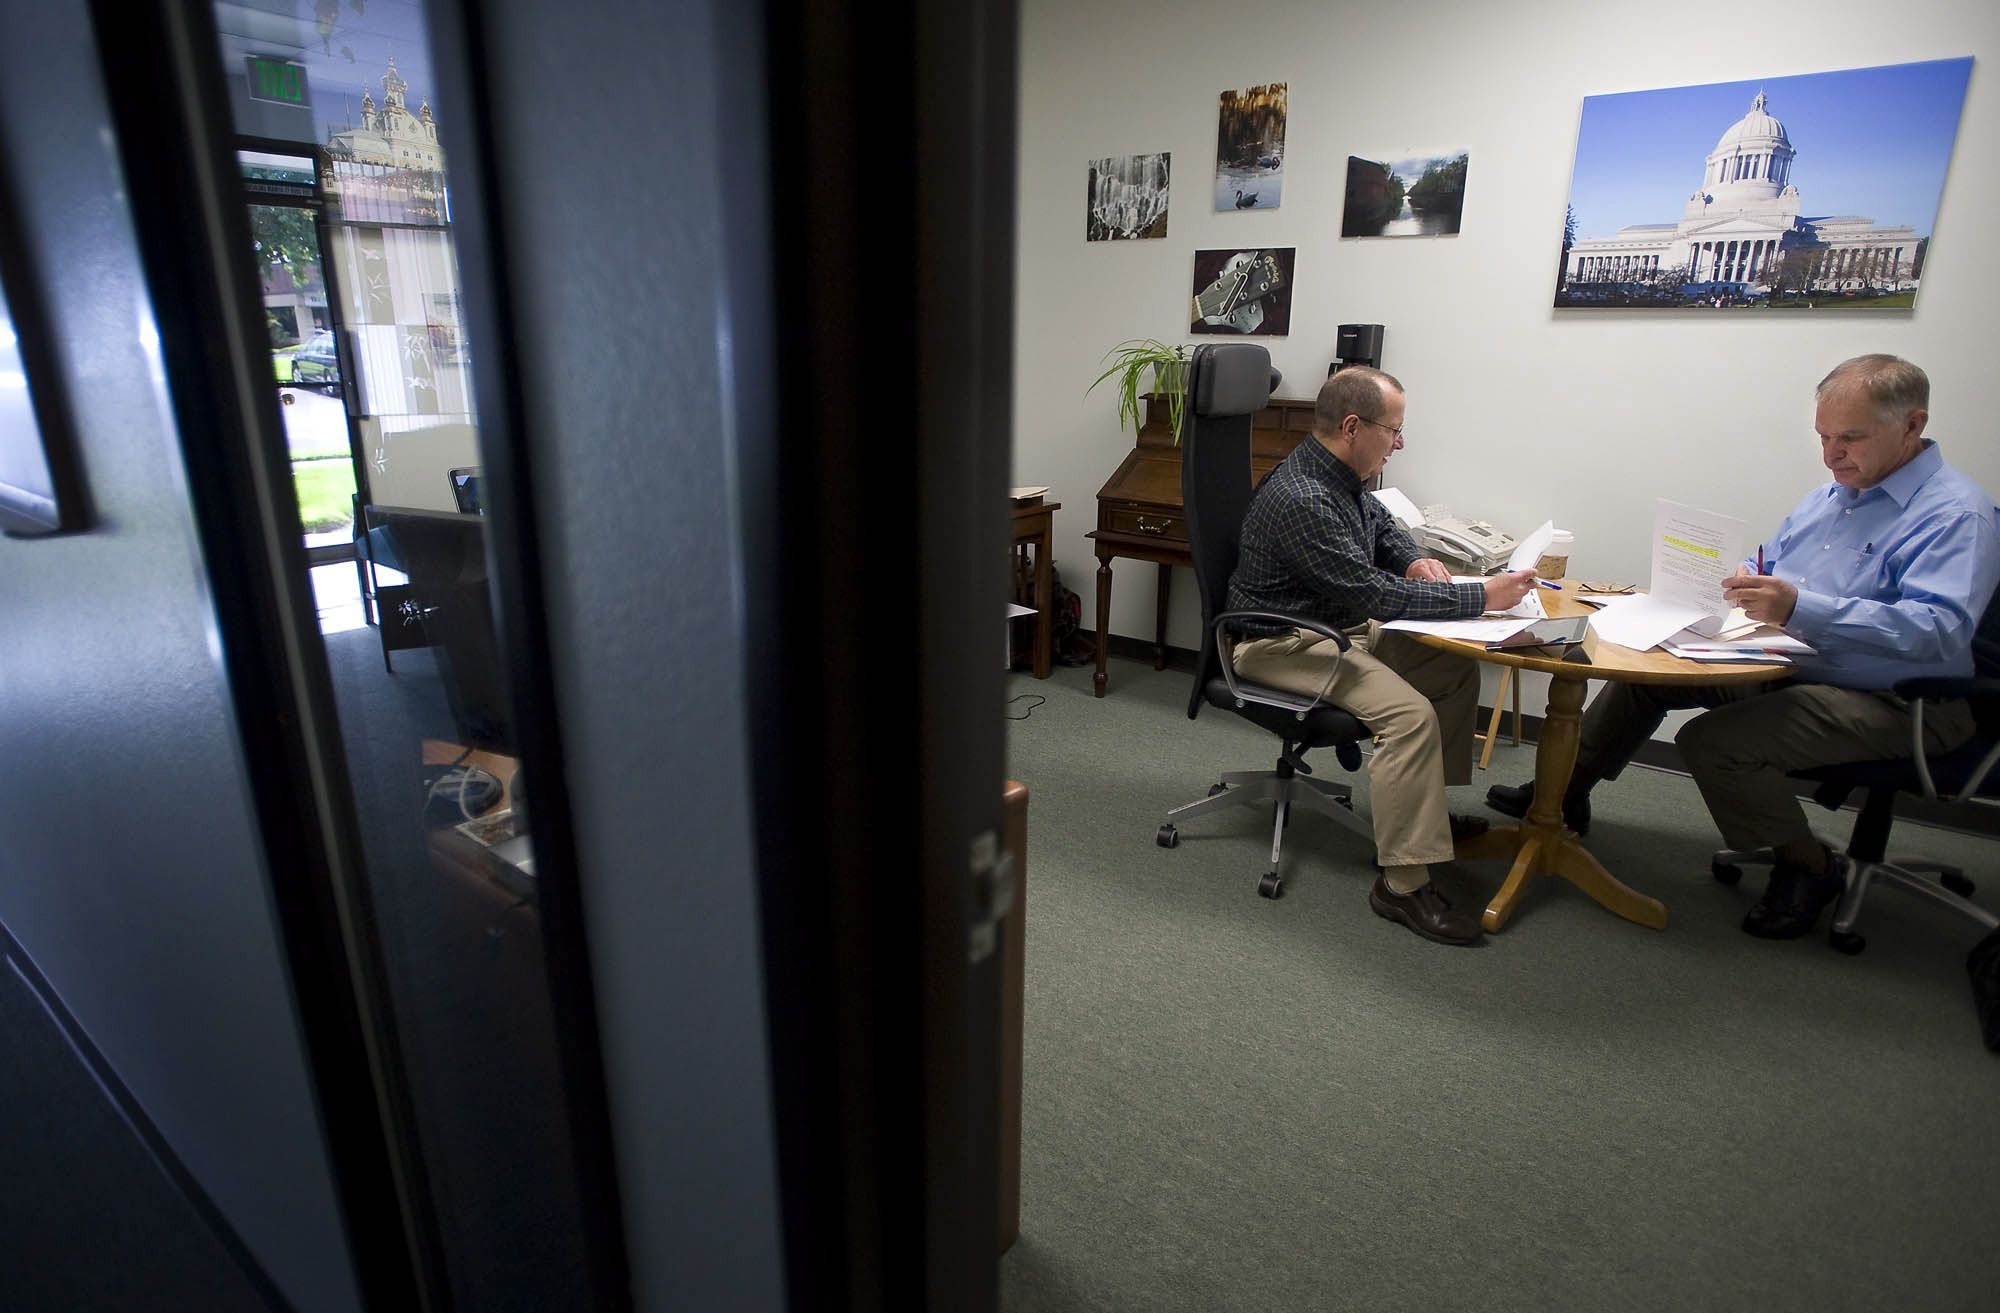 Photographer Tim Stewart, right, discusses his business plan with business adviser Buck Heidrick at the offices of the Small Business Development Center.